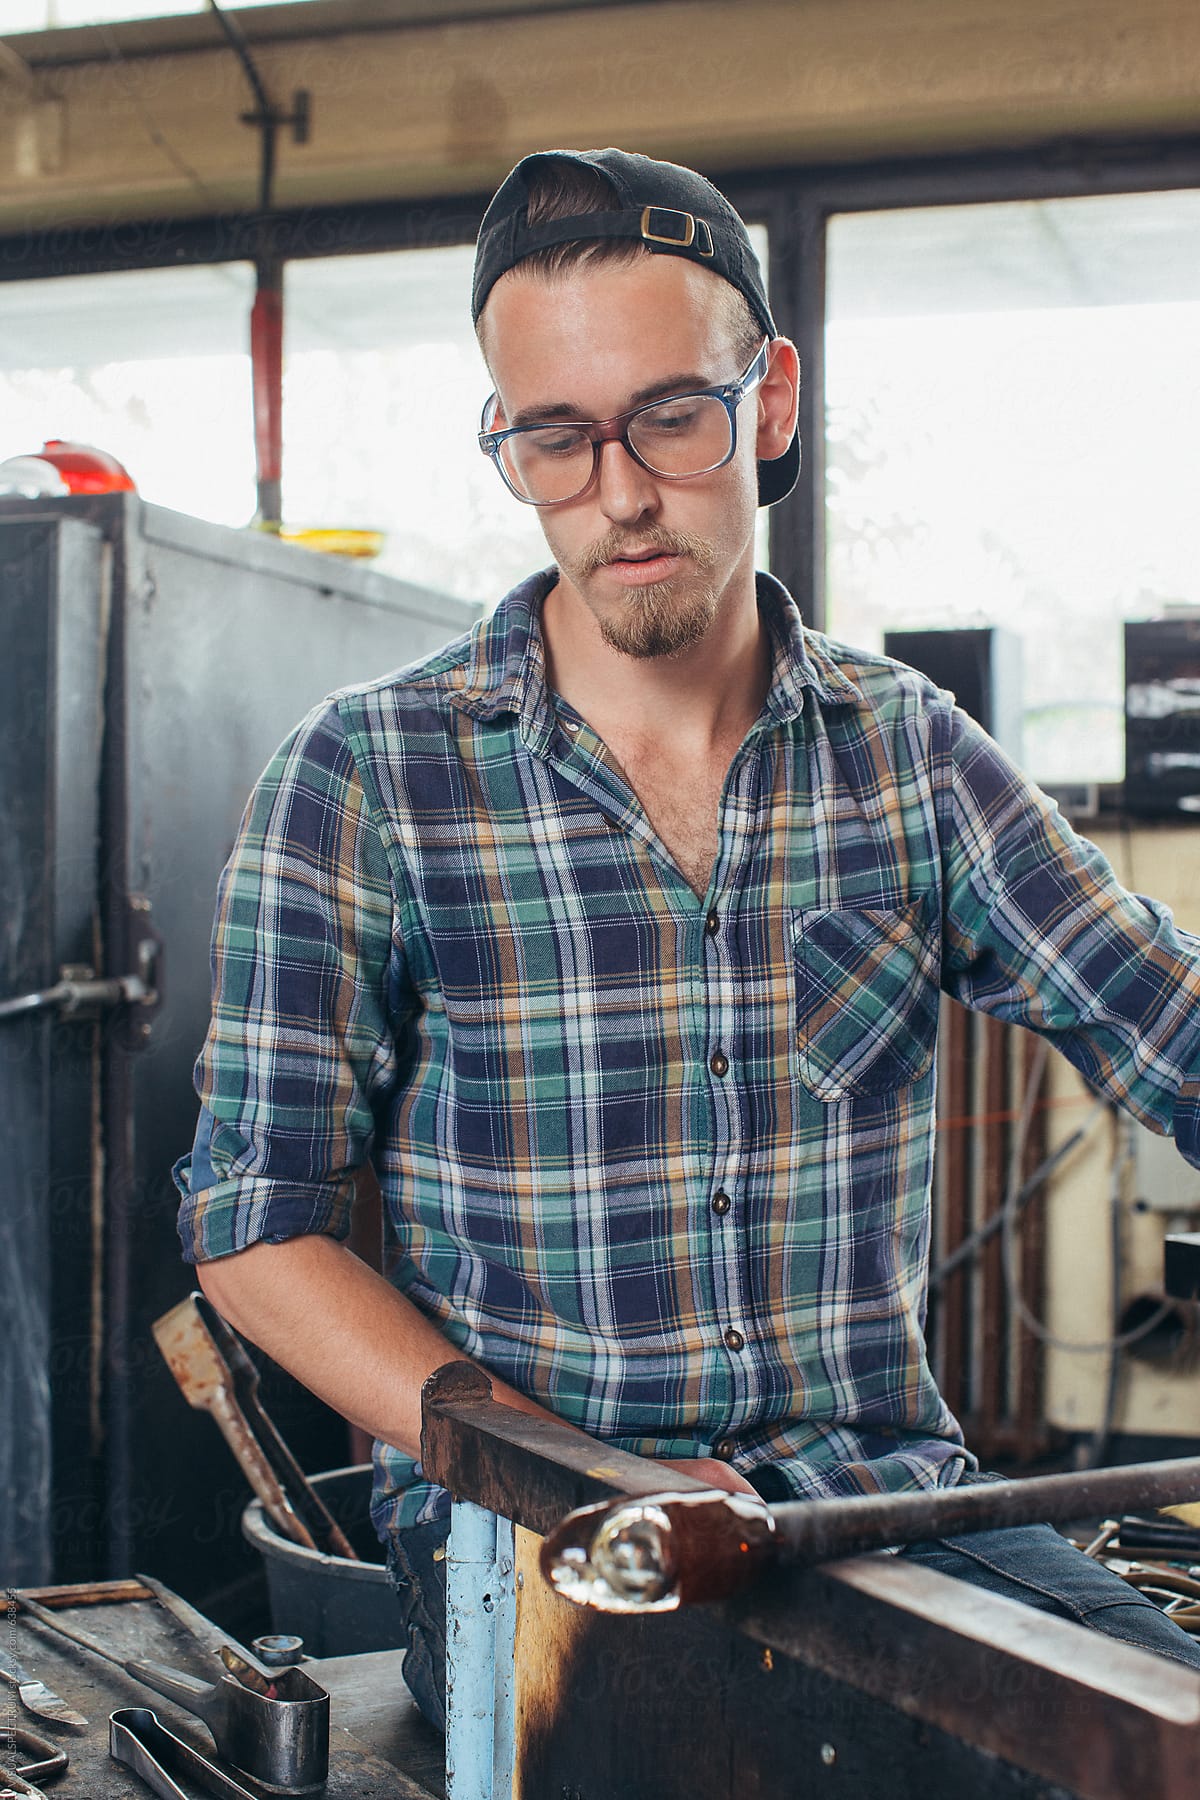 Artisan Glass Workshop - Portrait of Young Good-Looking Male Glass Artist Working Hot Glass